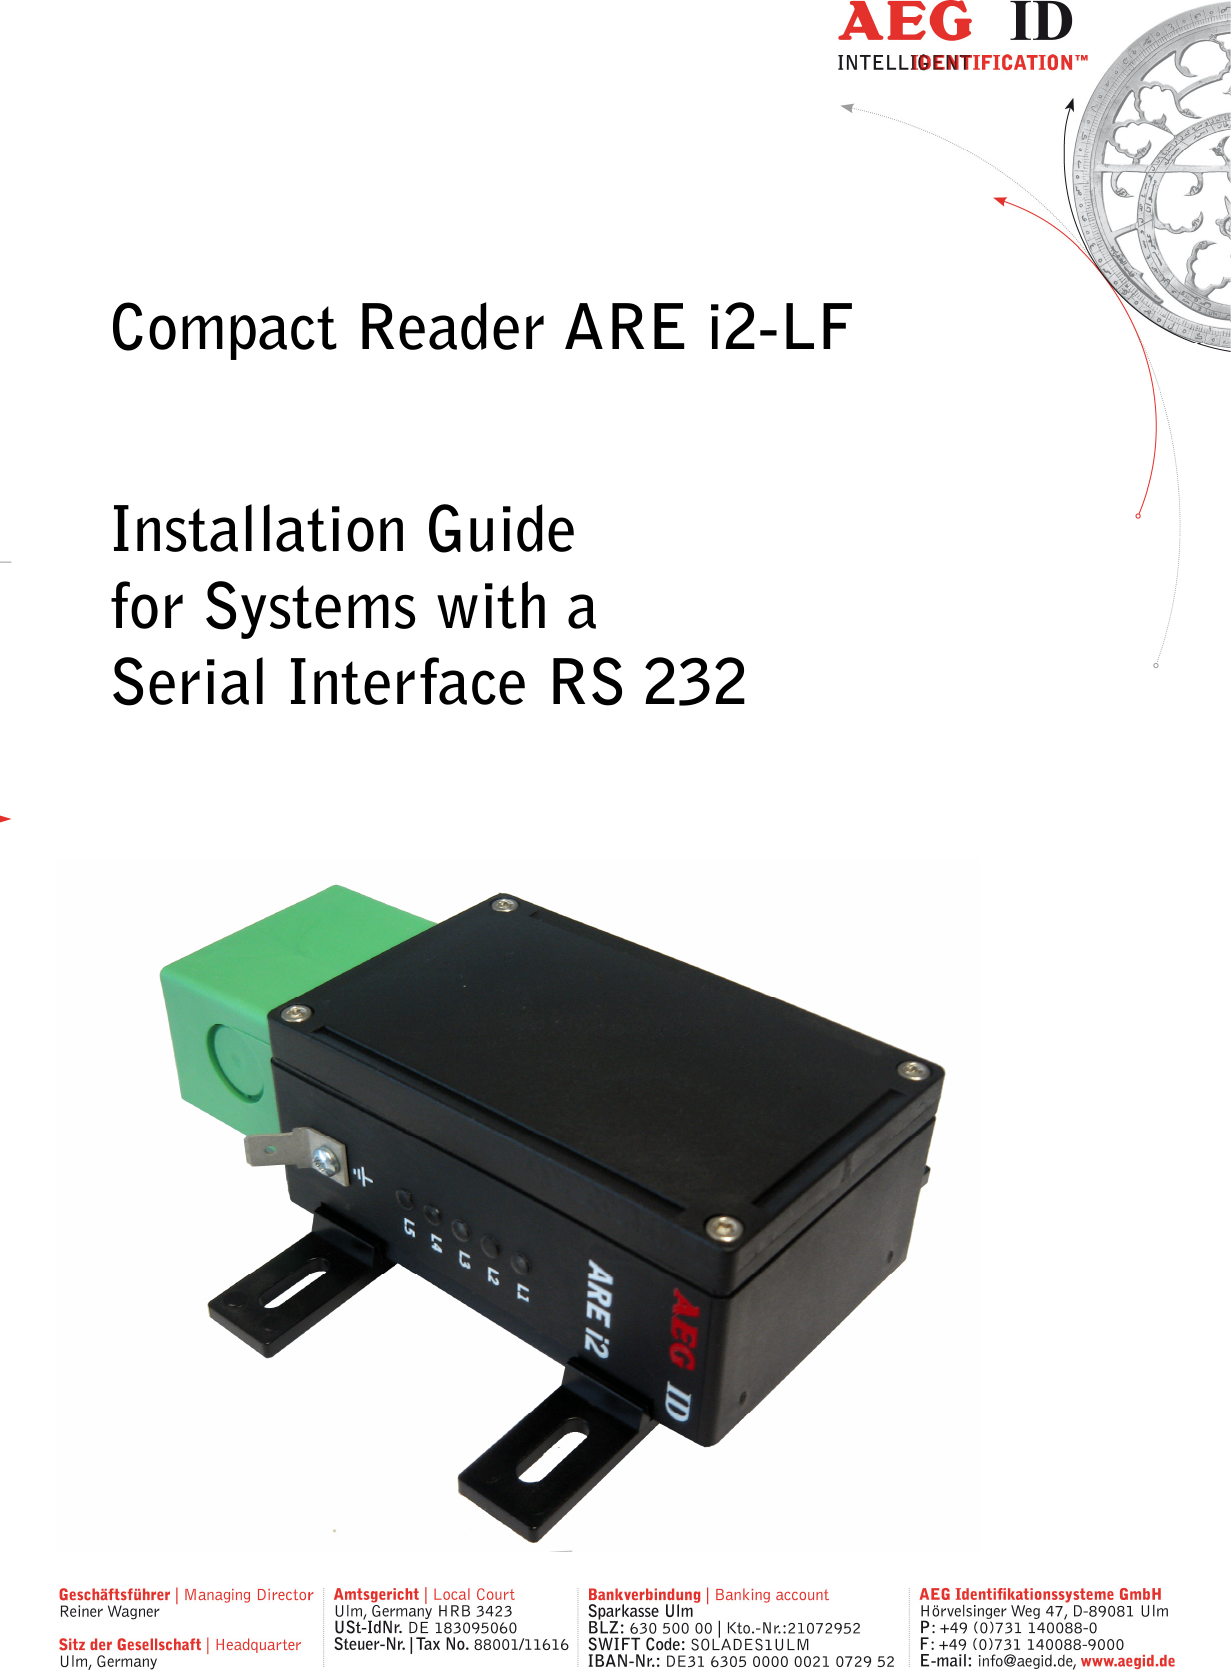         Compact Reader ARE i2-LF  Installation Guide for Systems with a  Serial Interface RS 232   